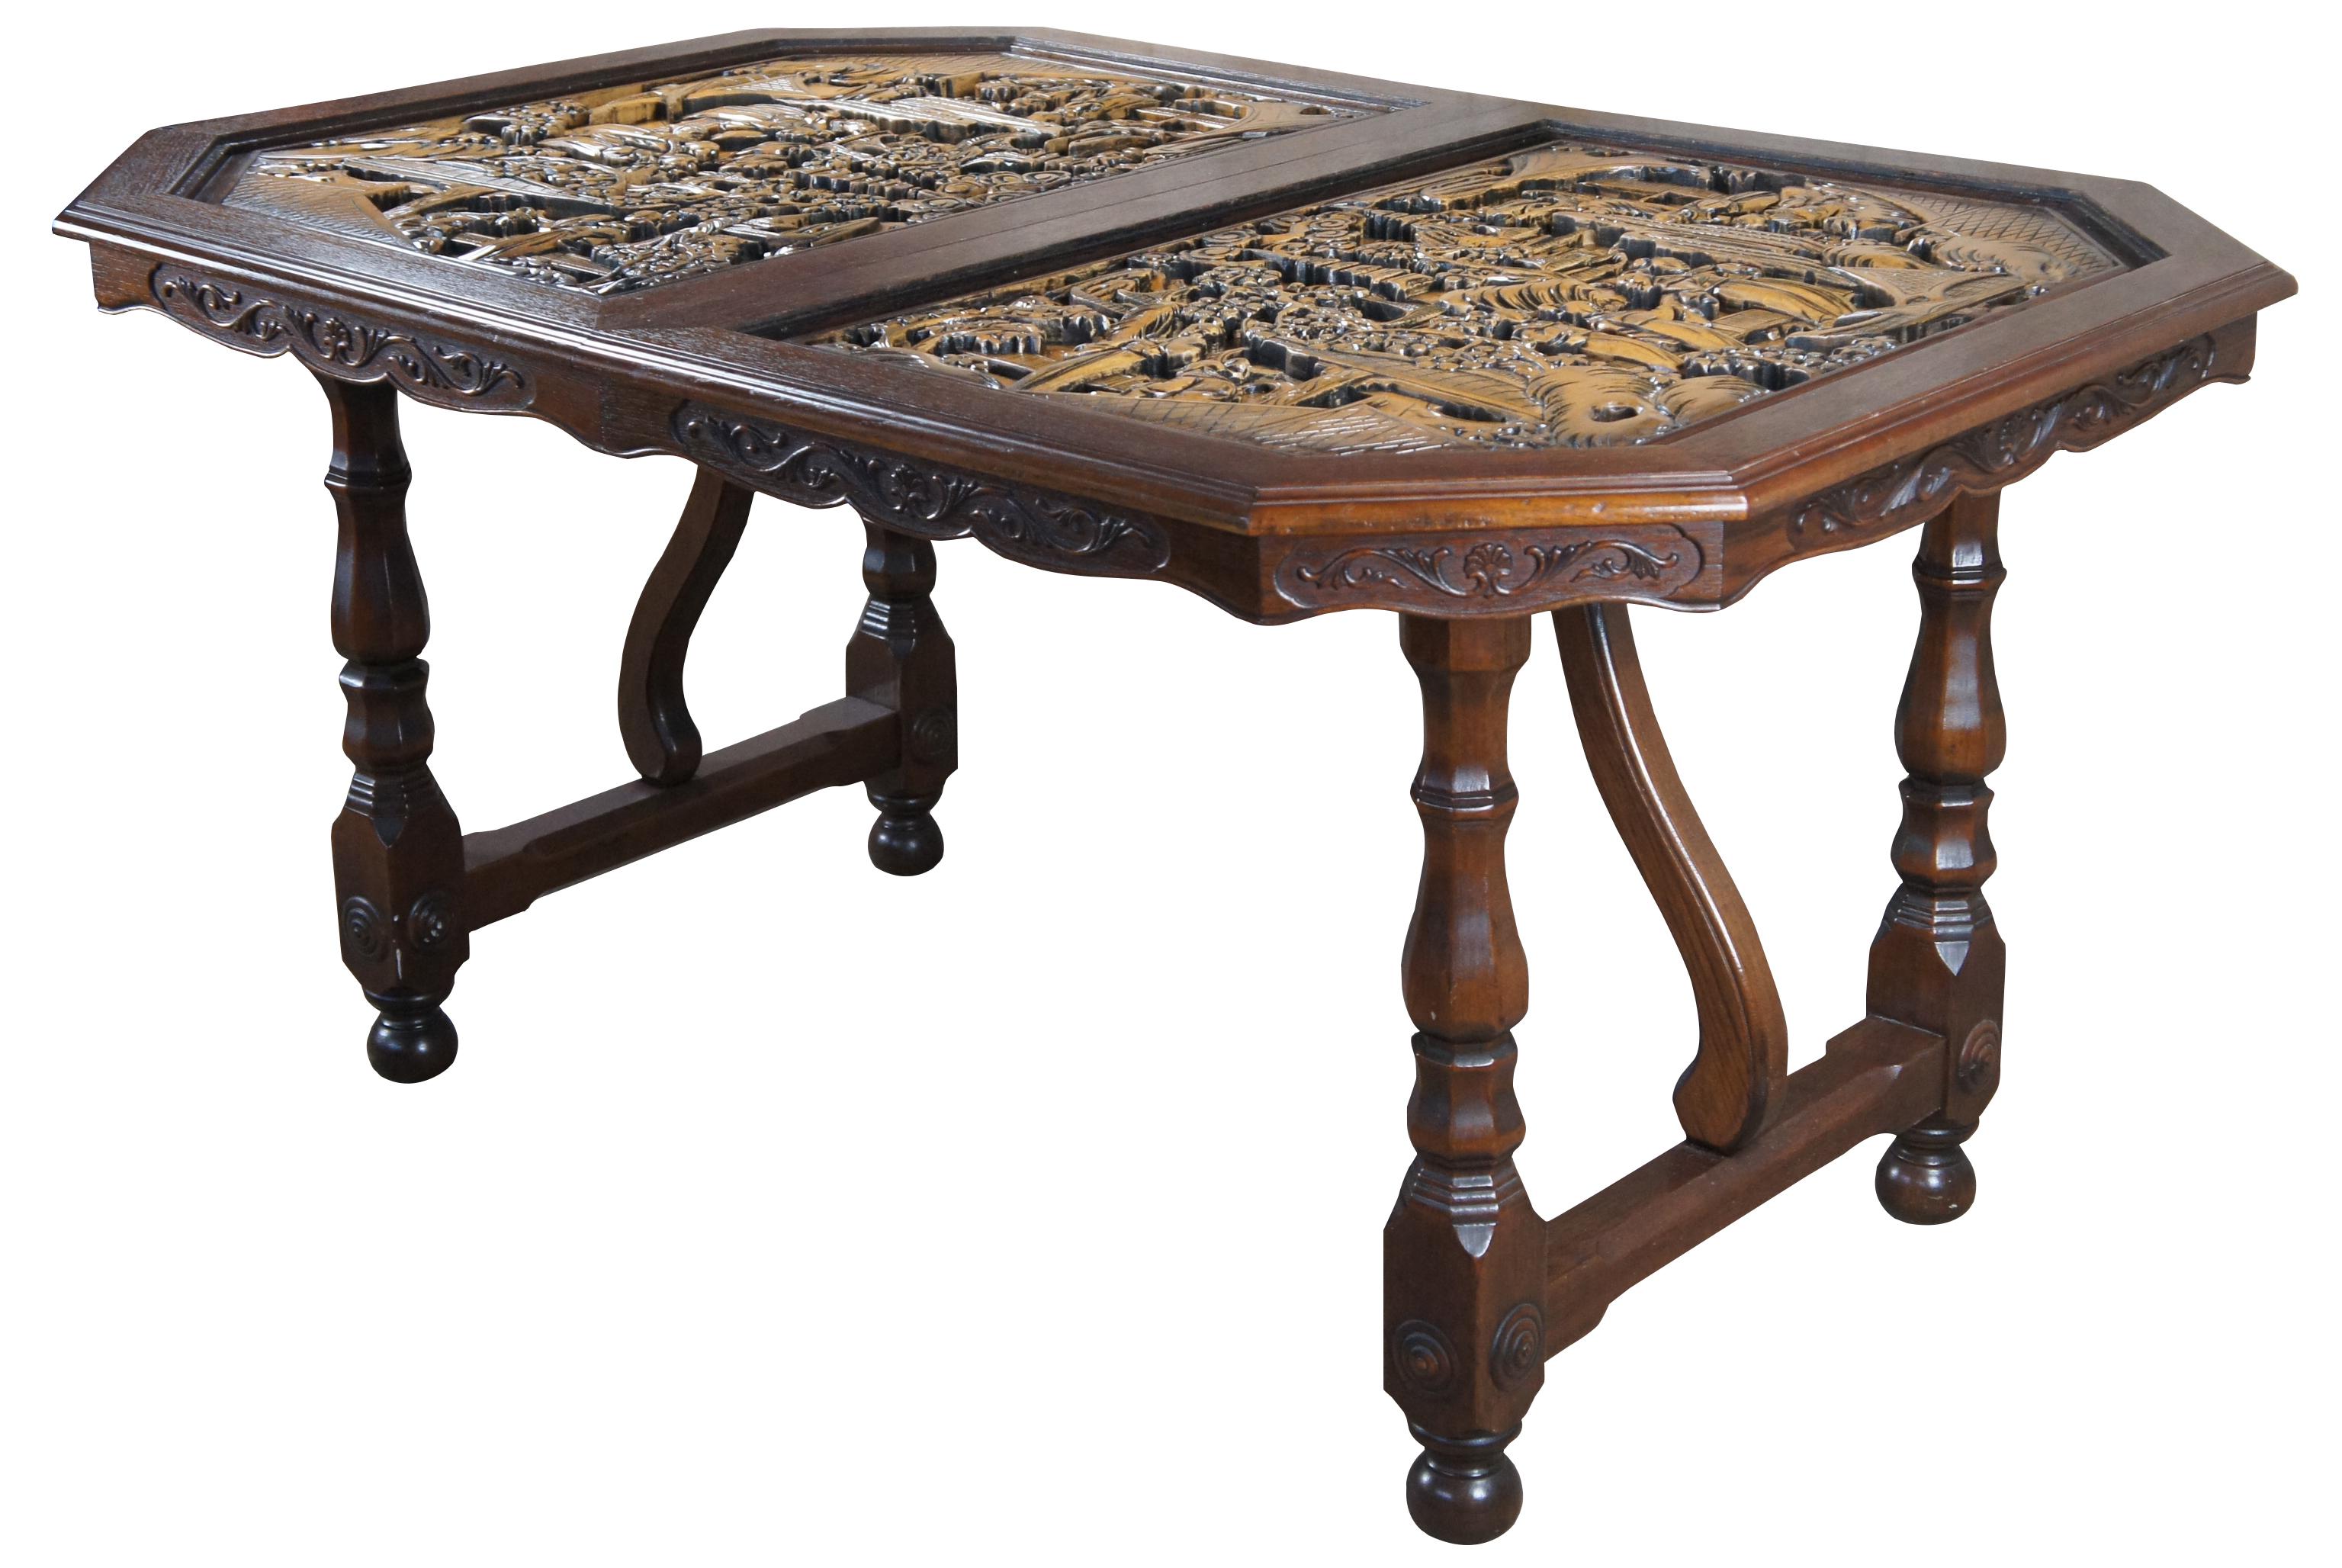 An impressive oriental dining room set that made in Okinawa Japan, circa 1970s. Hand crafted from oak with high relief intricately carved village scenes with figures inset into the table top. Each section is protected by removable glass tops.